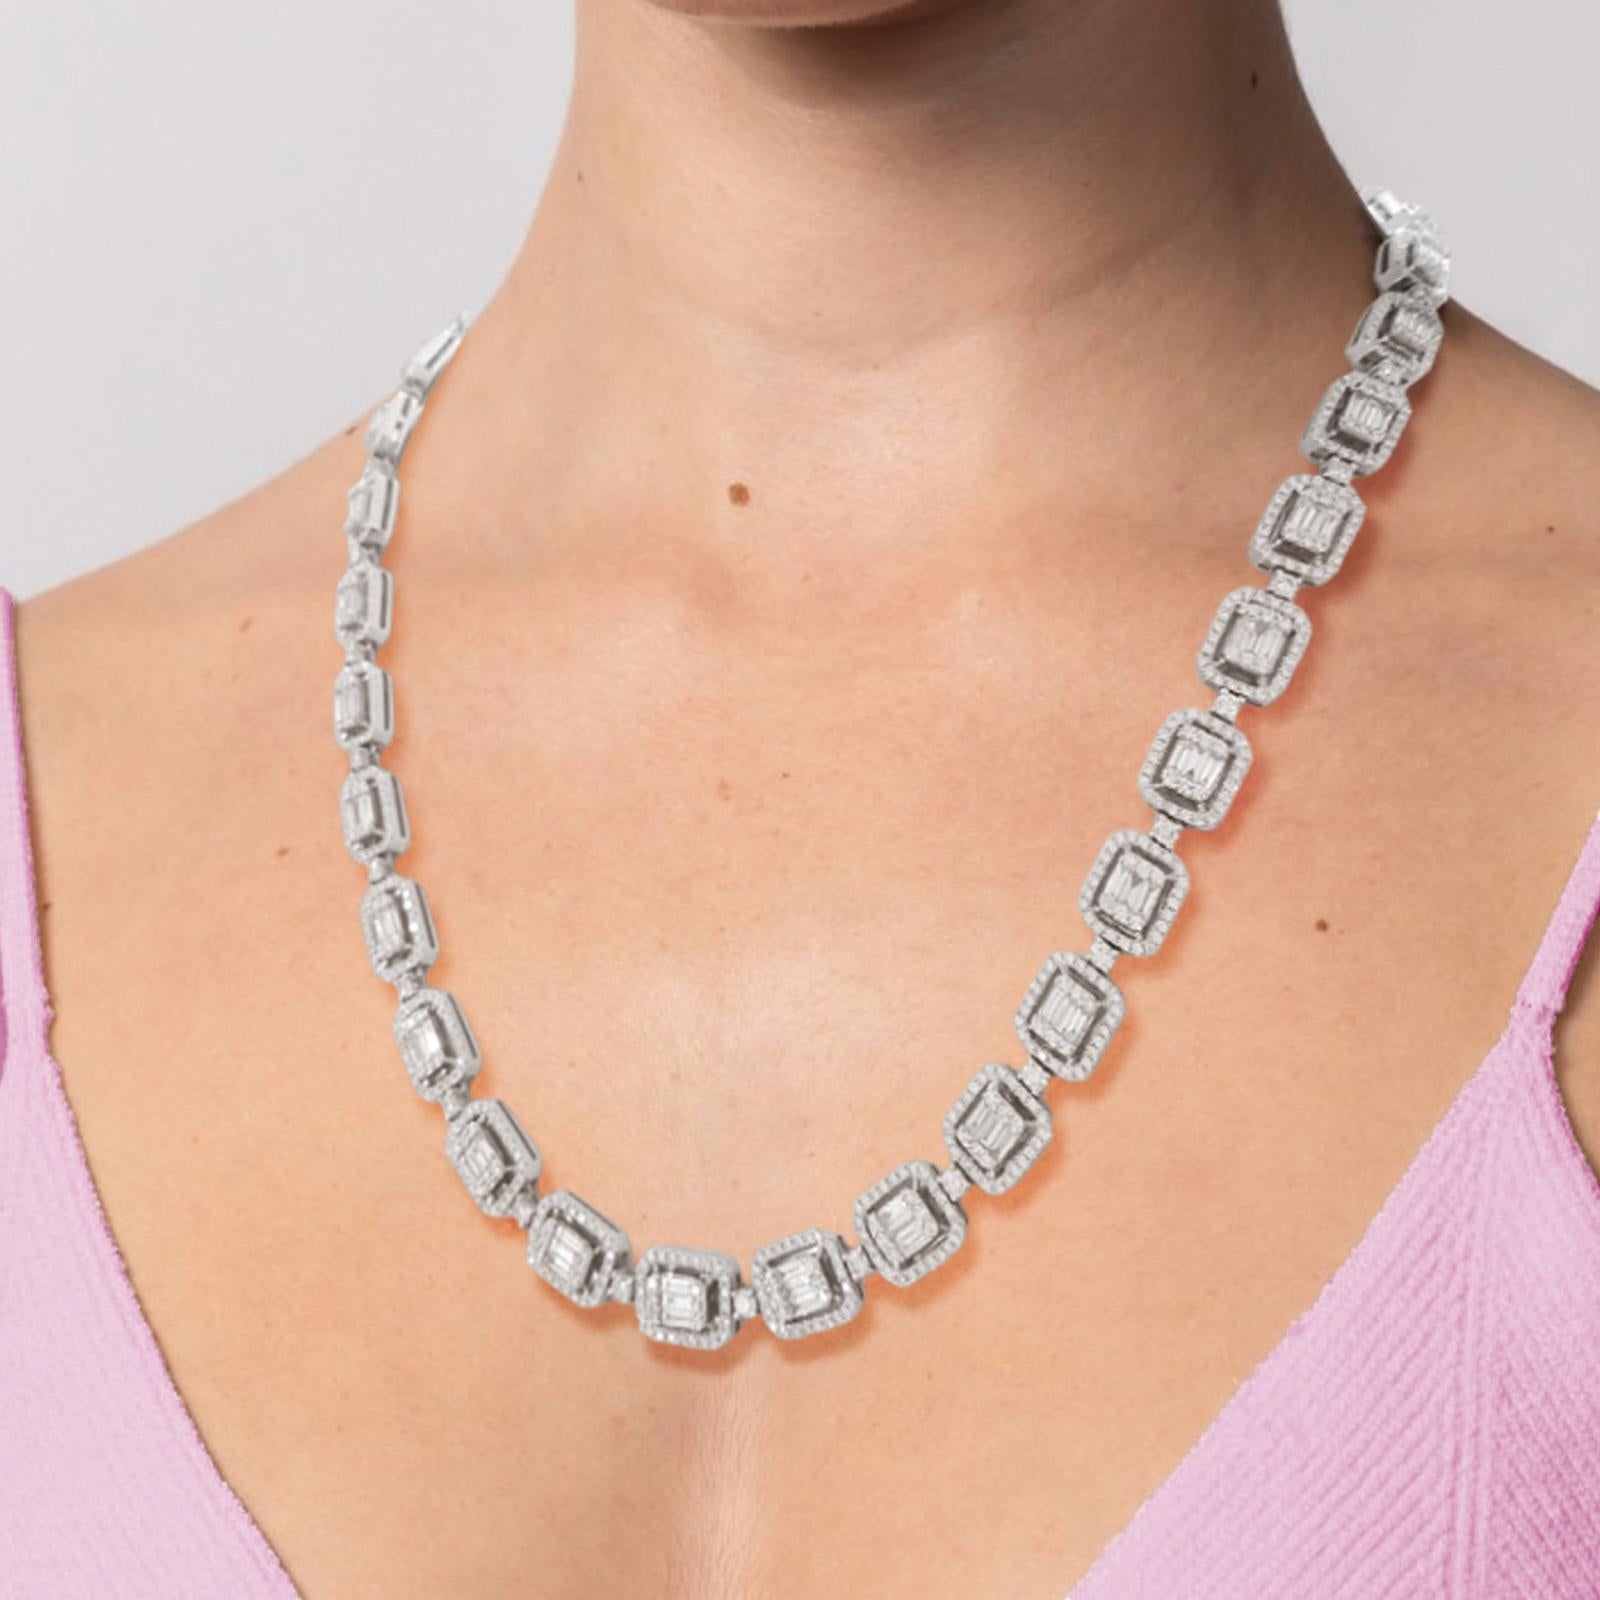 An exquisite  Brilliant and Baguette Cut Diamonds Tennis Necklace.

The necklace weighs 46.2 grams, 16.75